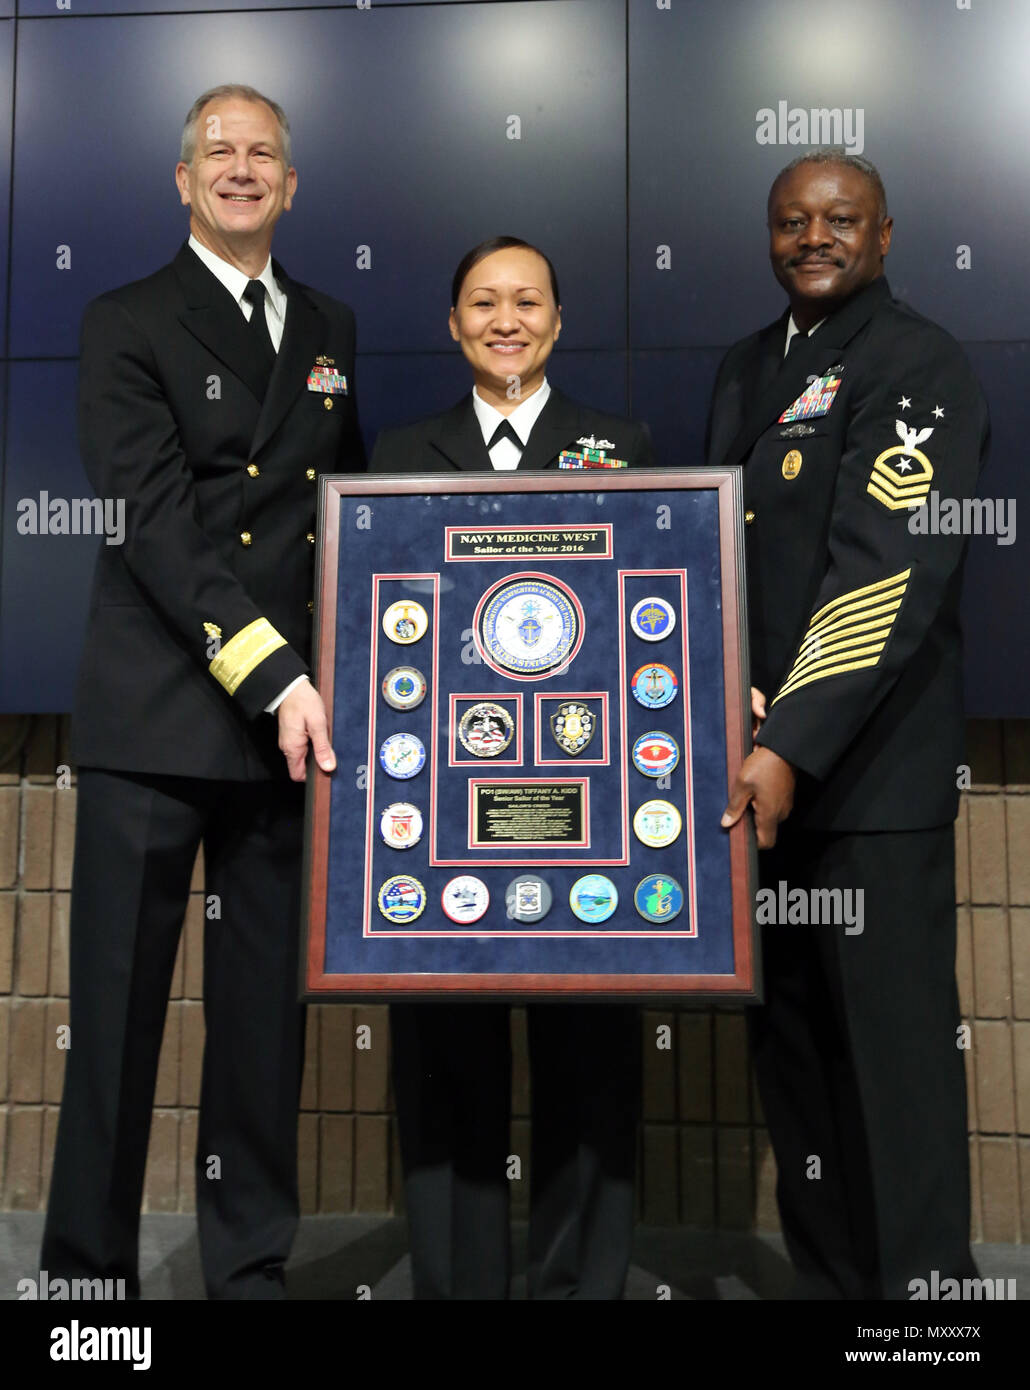 161209-N-KR391-003 SAN DIEGO (Dec 9, 2016) Rear Adm. Paul Pearigen, Commander Navy Medicine West (left), and Master Chief Hosea Smith, Command Master Chief, Navy Medicine West (right), present the Navy Medicine West Sailor of the Year plaque to Petty Officer 1st Class Tiffany Kidd, from U.S. Naval Hospital Yokosuka, in an auditorium packed with Sailors and civilians at Navy Medicine West Headquarters. (Photo by Chief Petty Officer Kimberley Blaine-Sweet /Released) Stock Photo